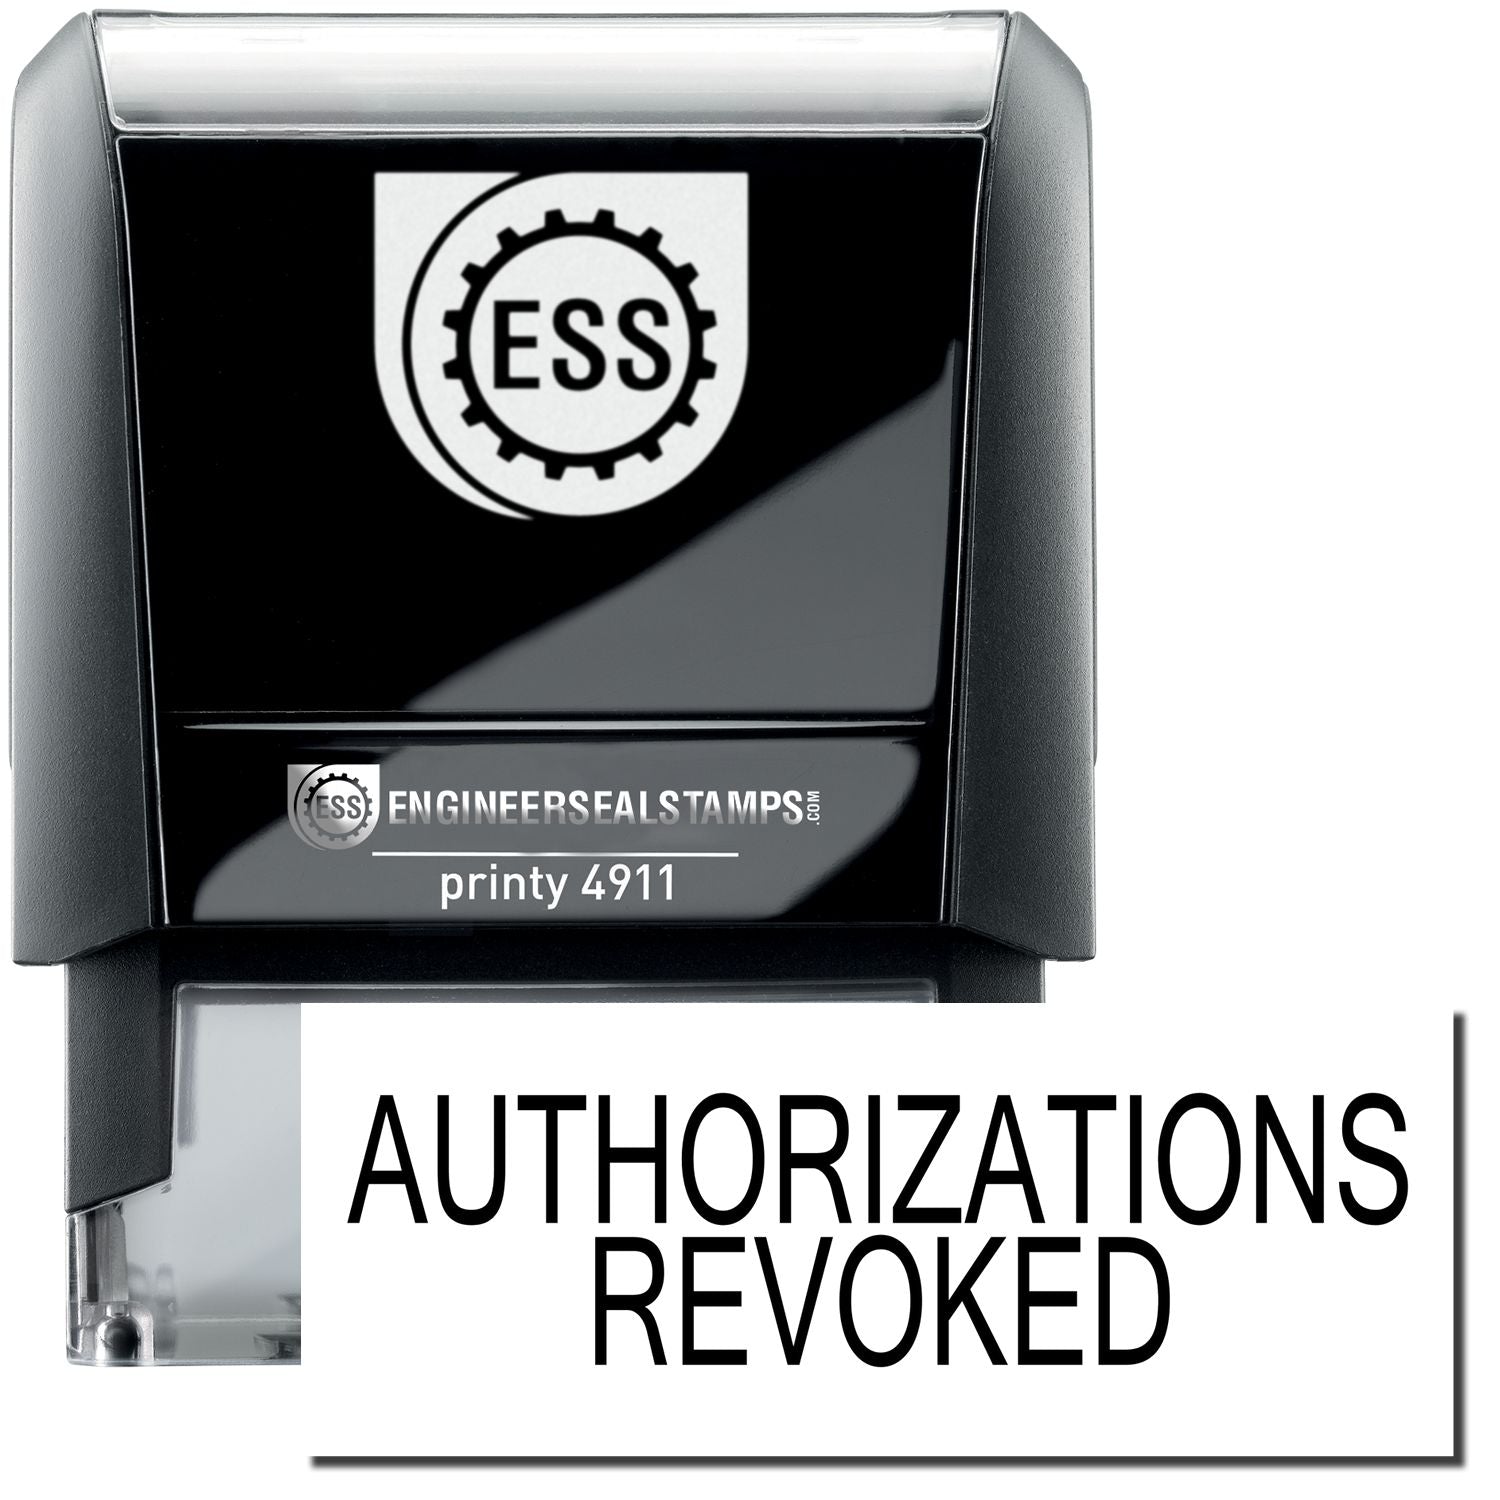 A self-inking stamp with a stamped image showing how the text "AUTHORIZATIONS REVOKED" is displayed after stamping.